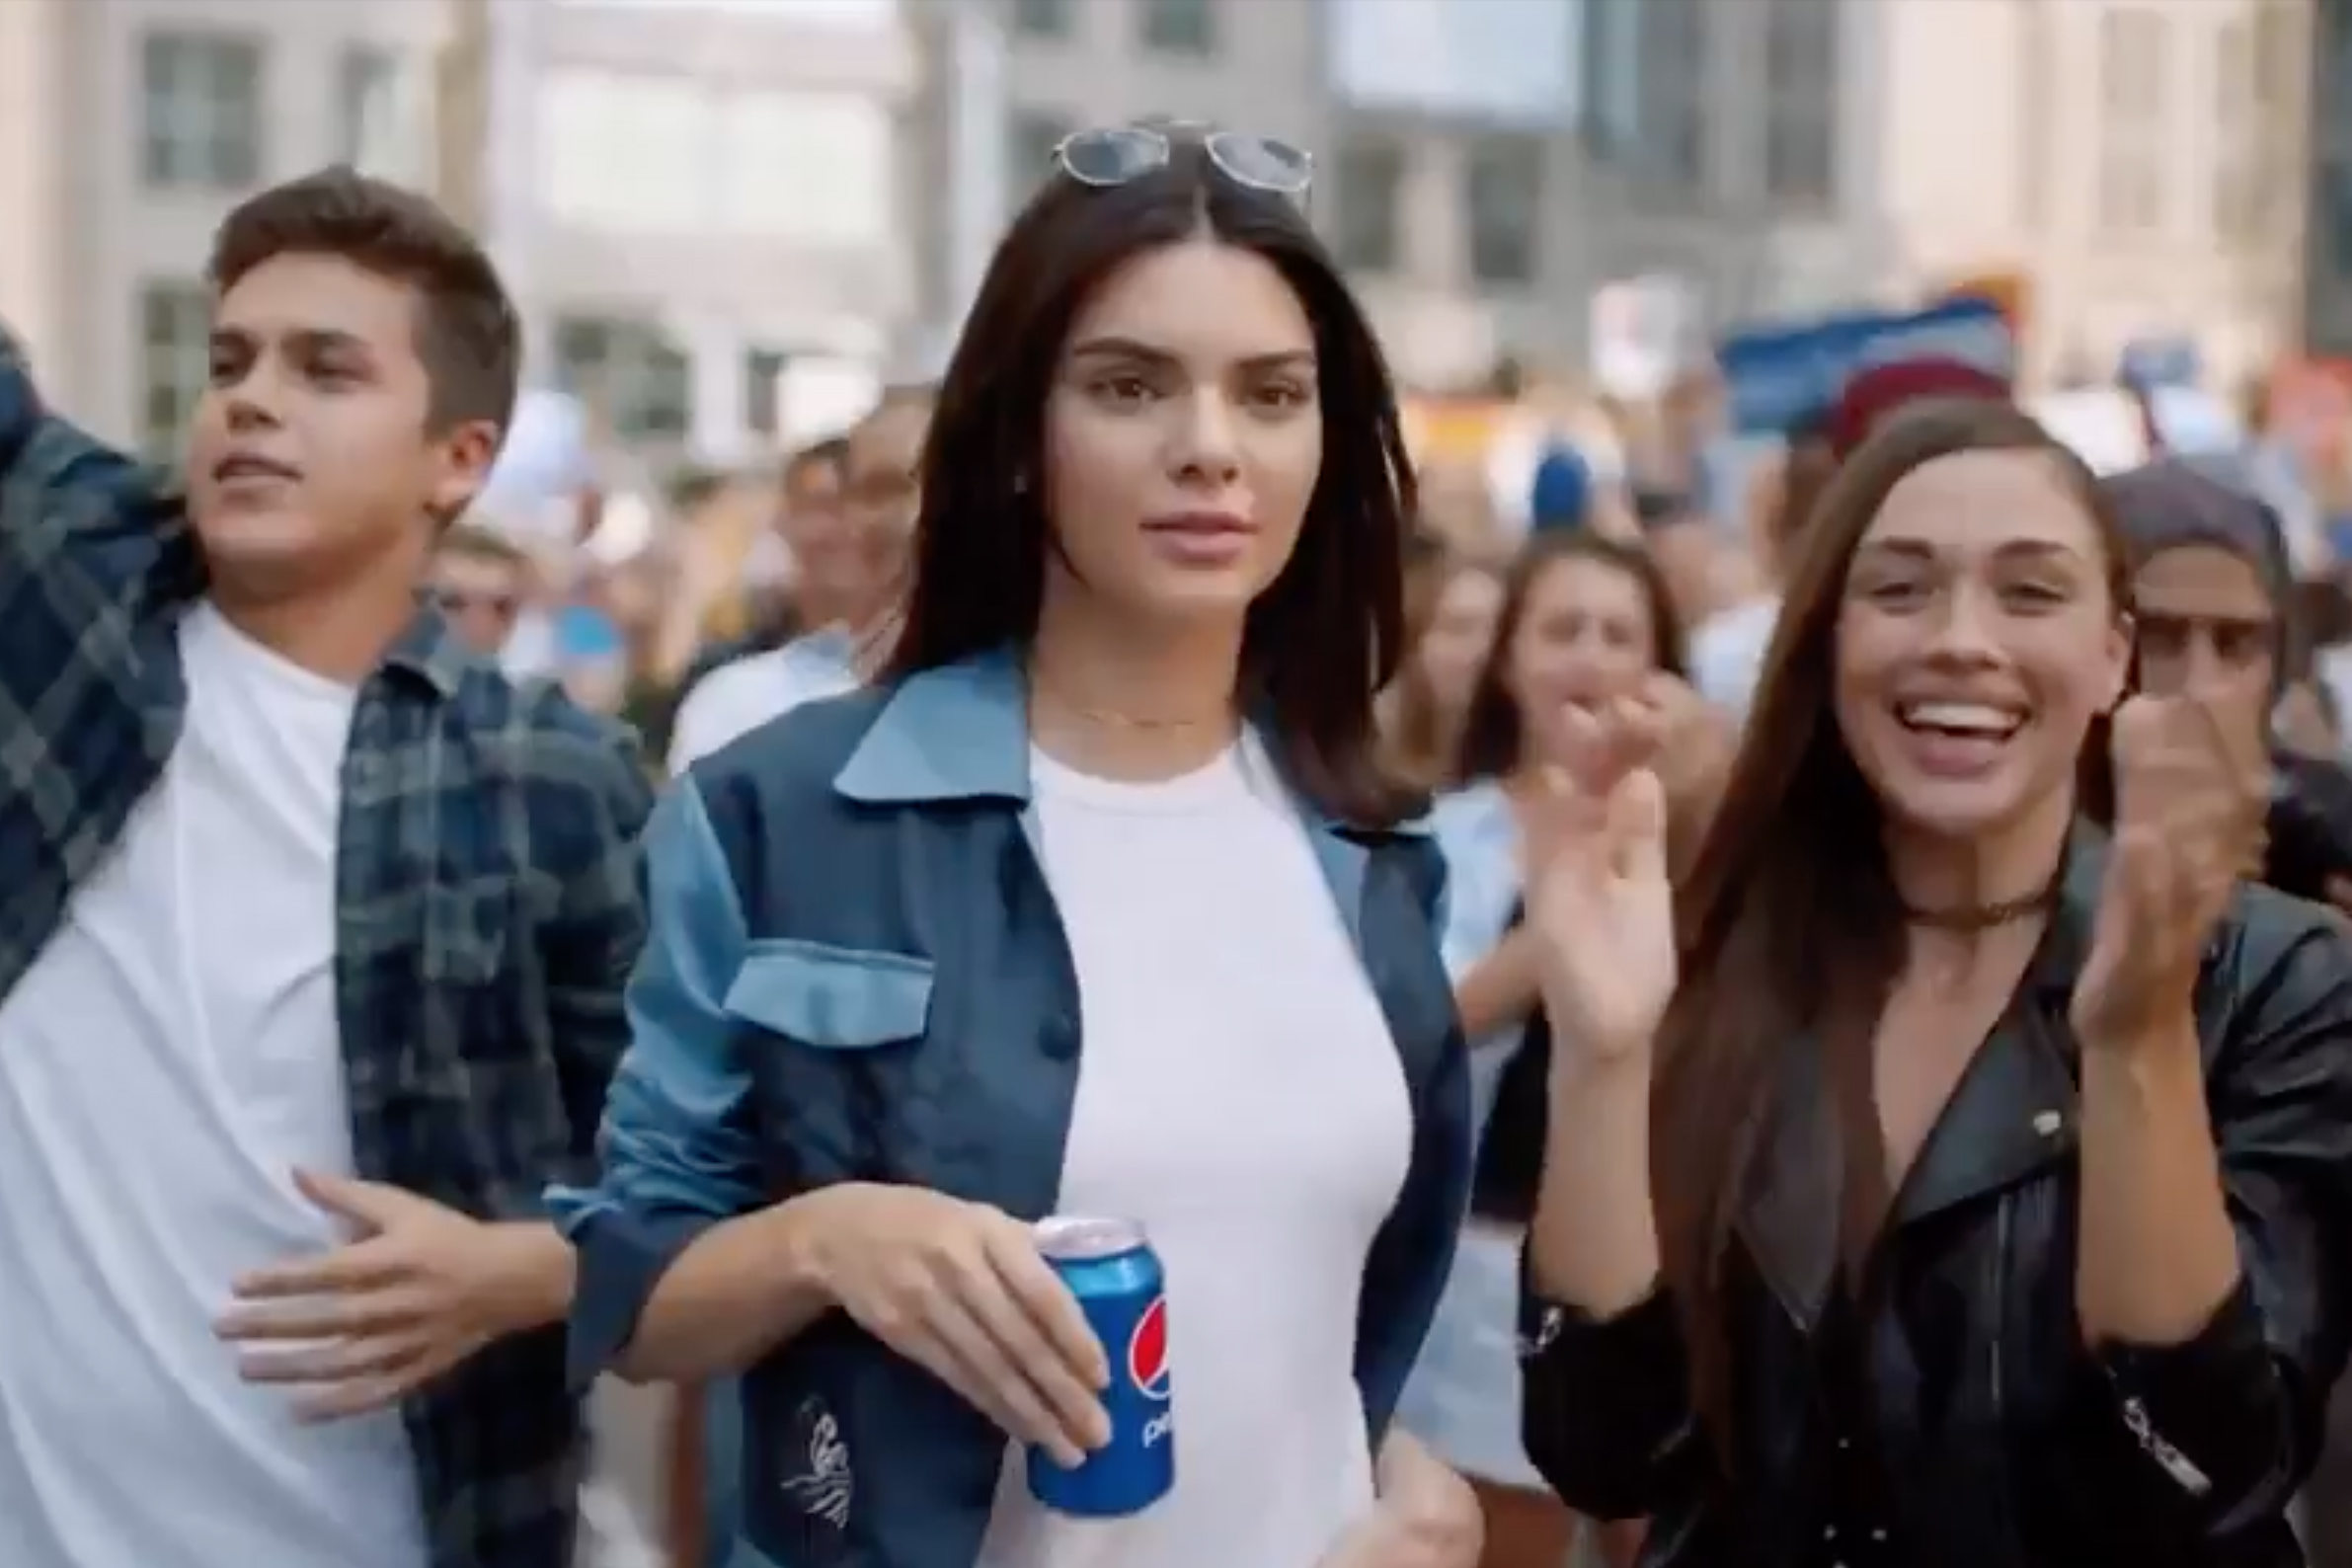 Kendall Jenner Pepsi Ad: Why It's a Glaring Misstep | Time